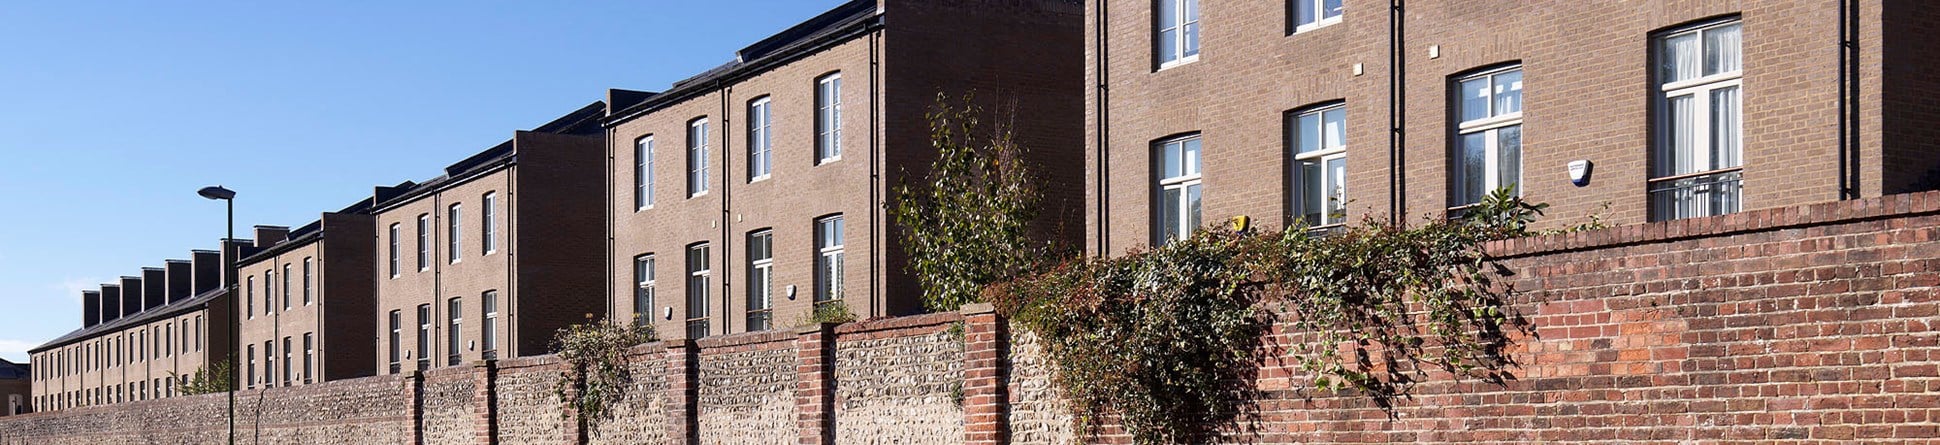 An exterior view of a boundary wall and redeveloped blocks of brick housing.